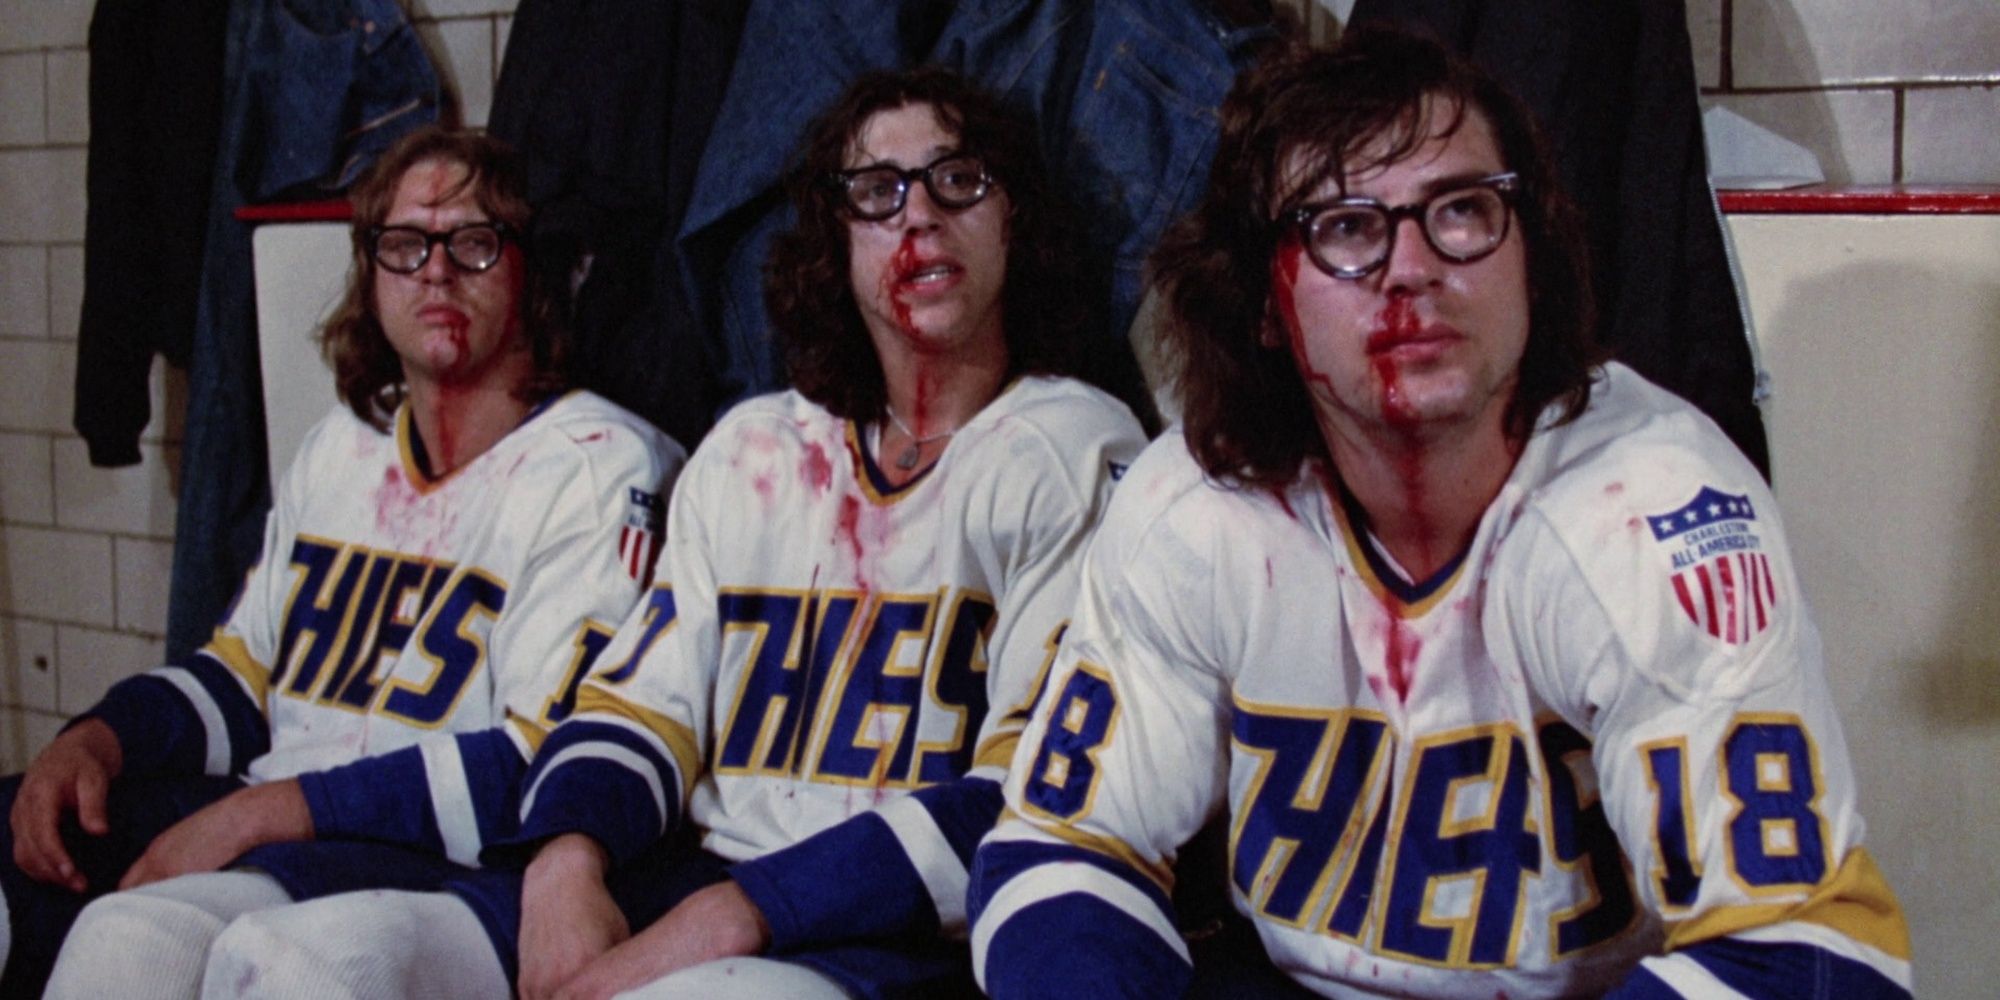 Three ice hockey players sit bloodied in their uniforms